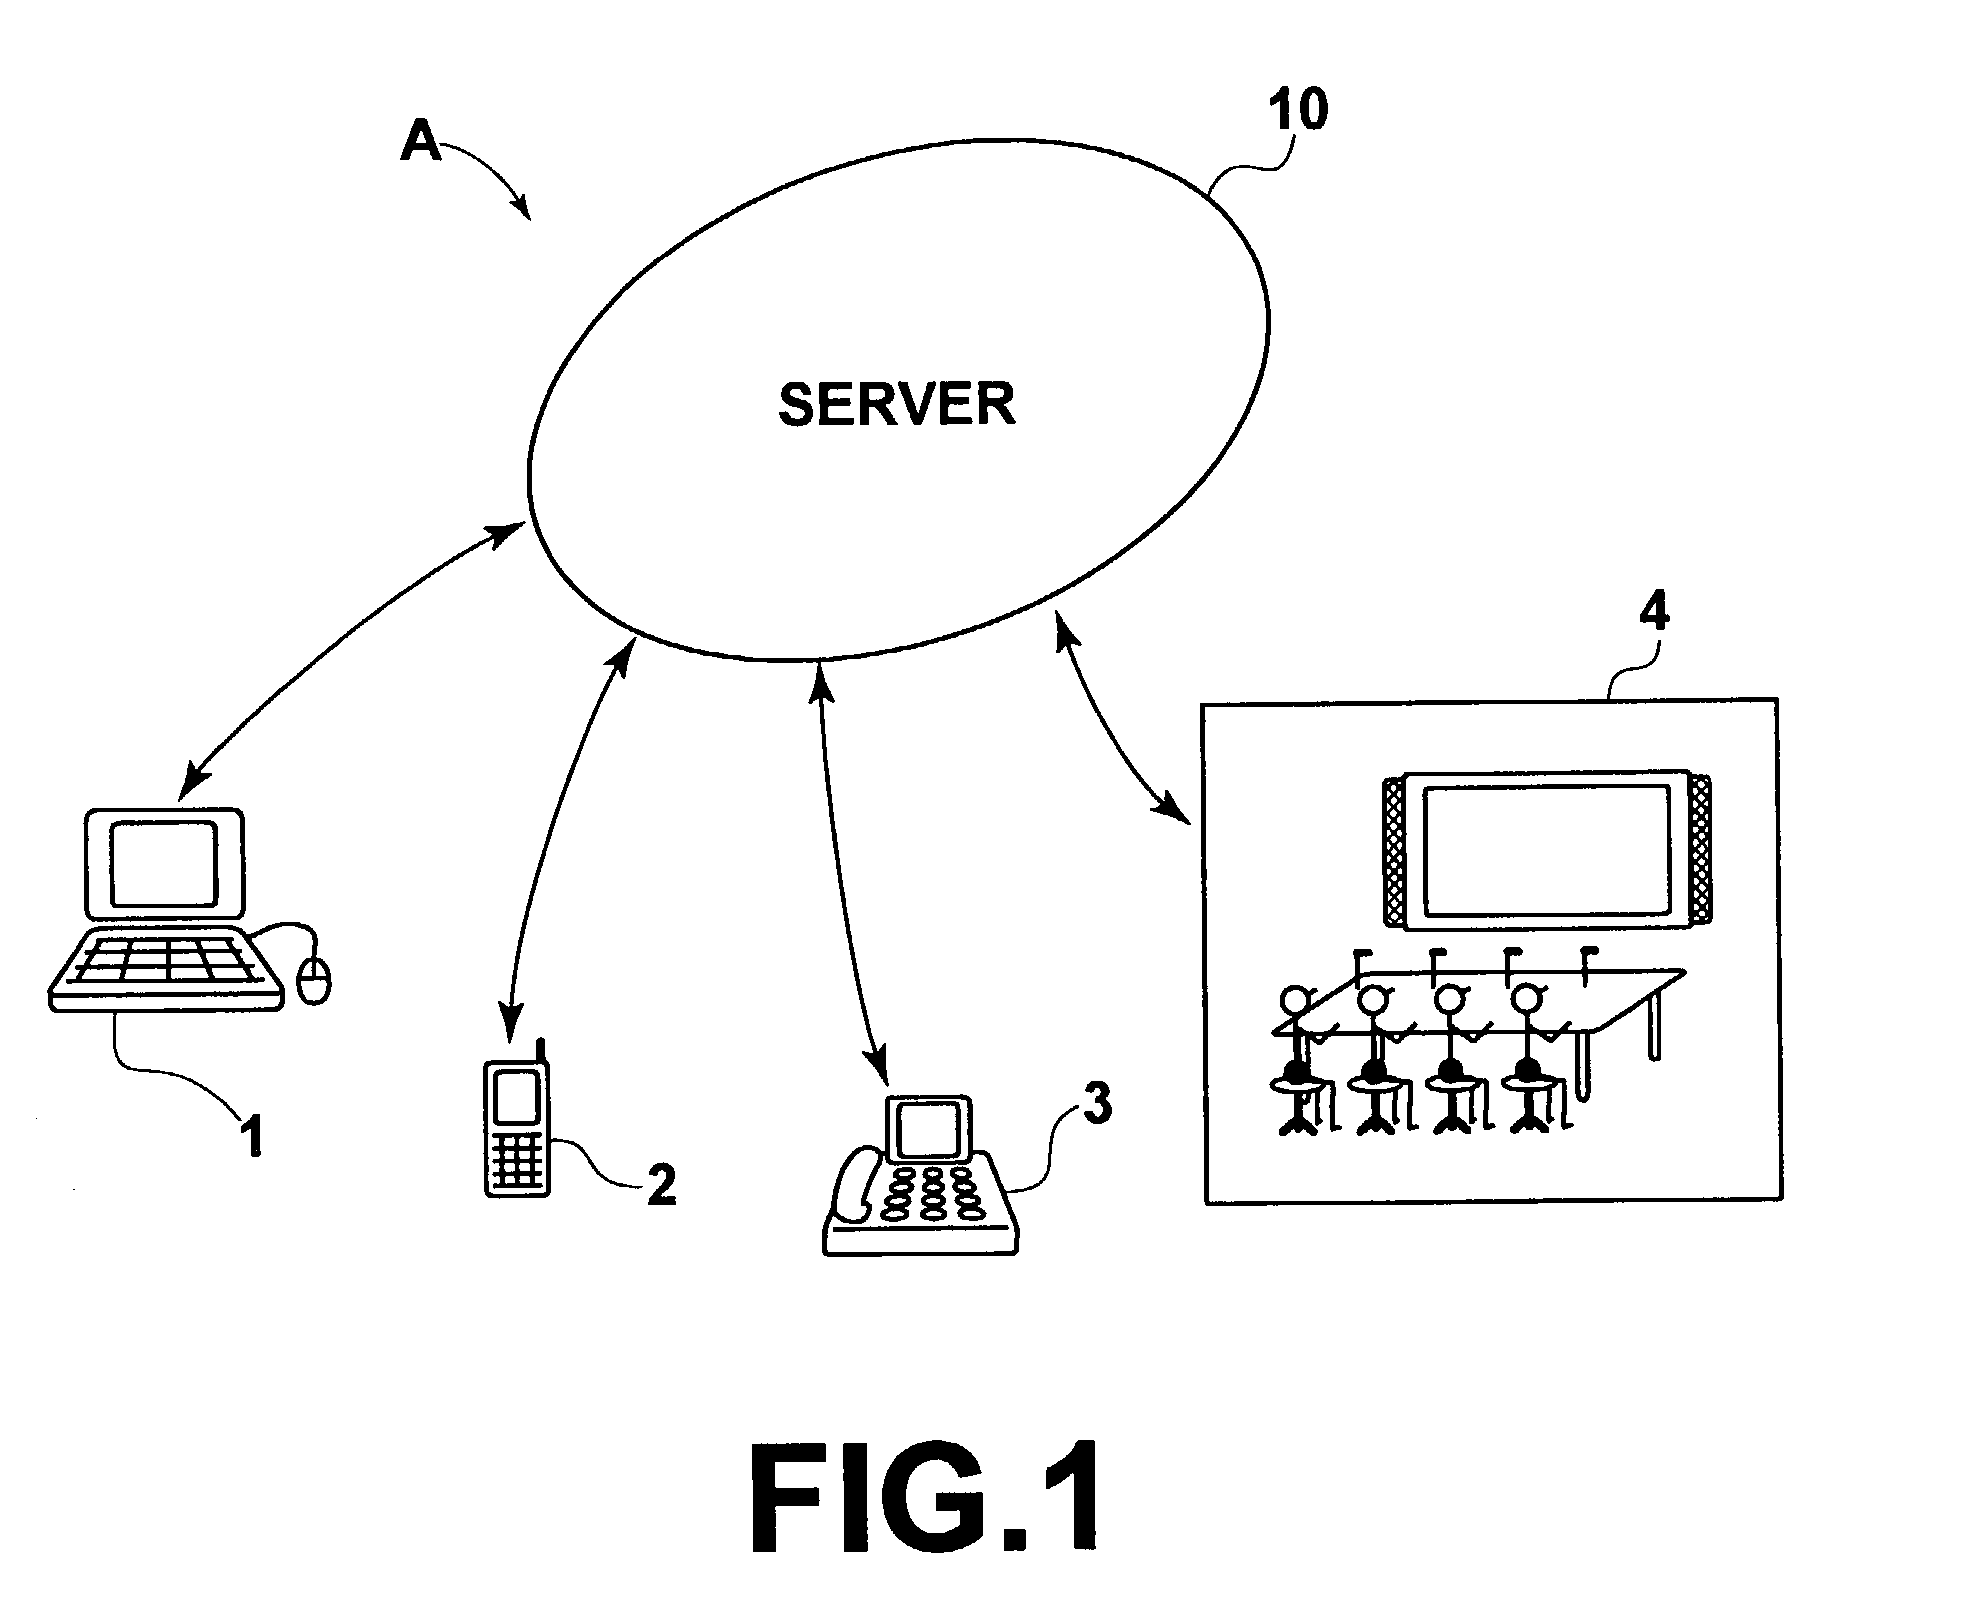 Teleconferencing server and teleconferencing system